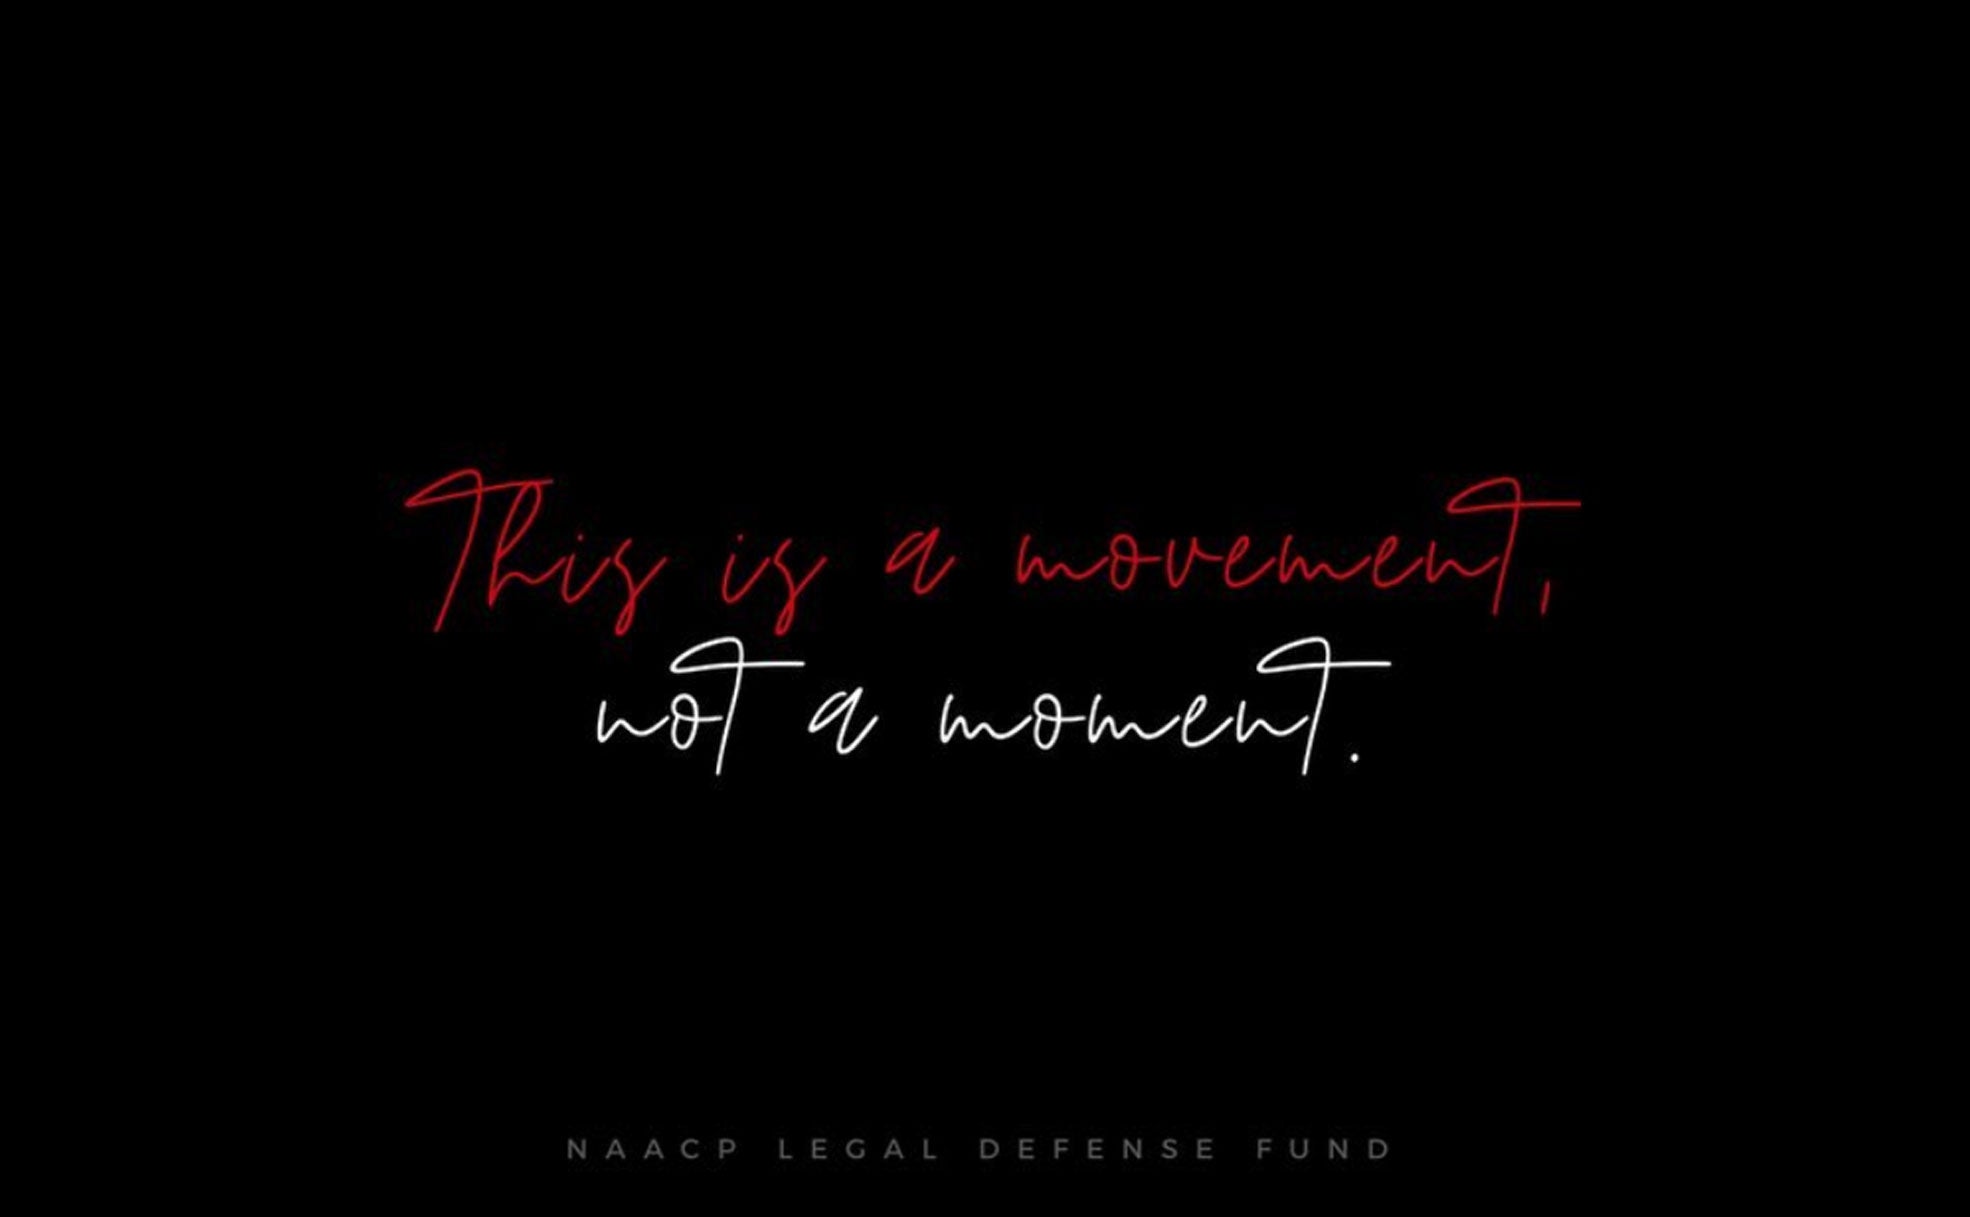 The NAACP Legal Defense Fund